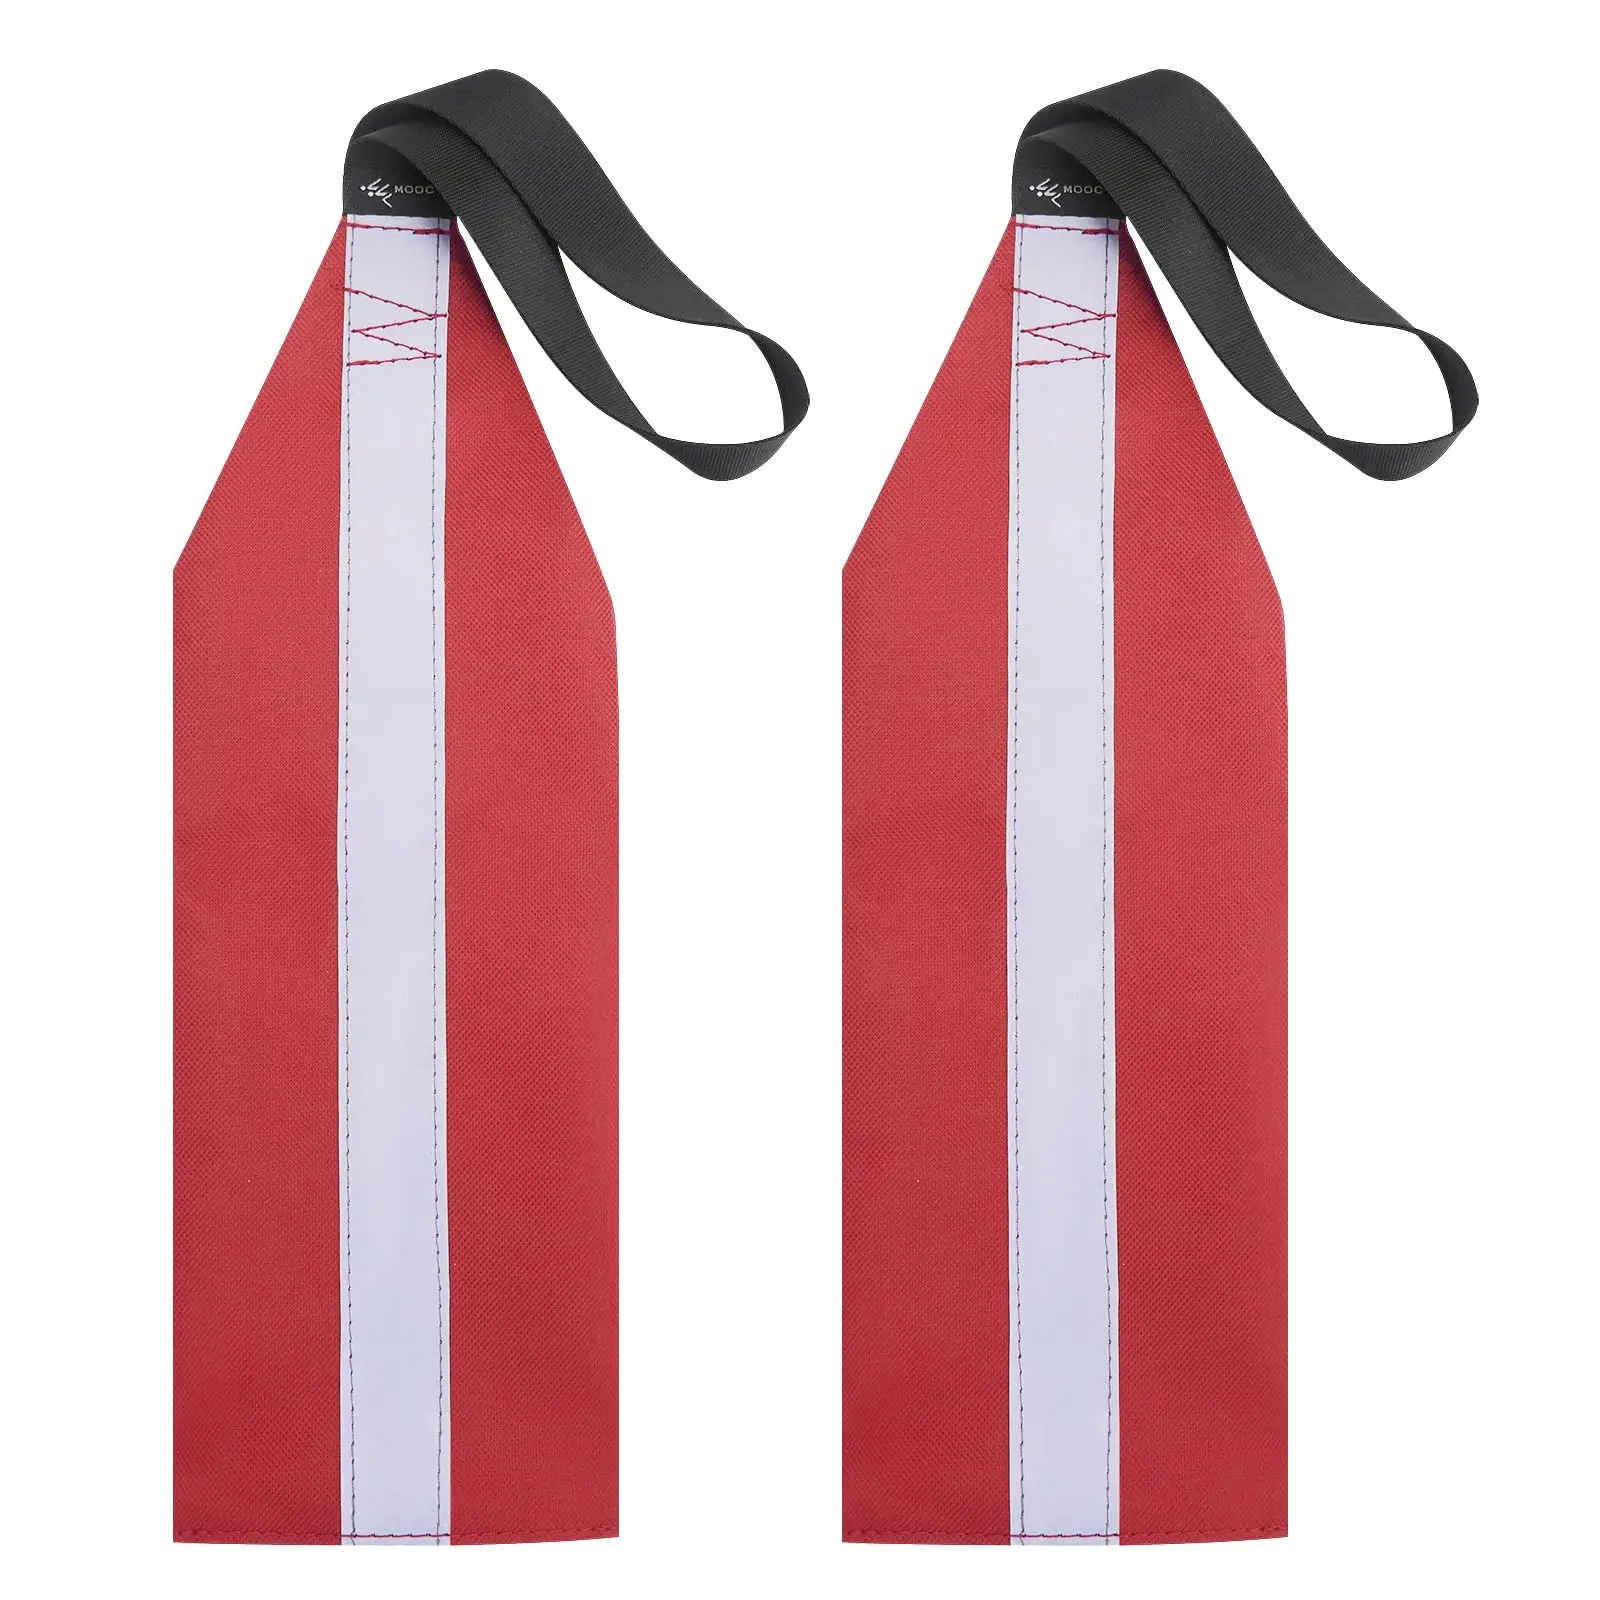 Red Flag Truck Loads (Pack of 2), Warning Flags for Kayak Safety Towing,Travel Trailer Tow Accessories 4pcs referee flag flags race conducting flags hand flags match referee flag